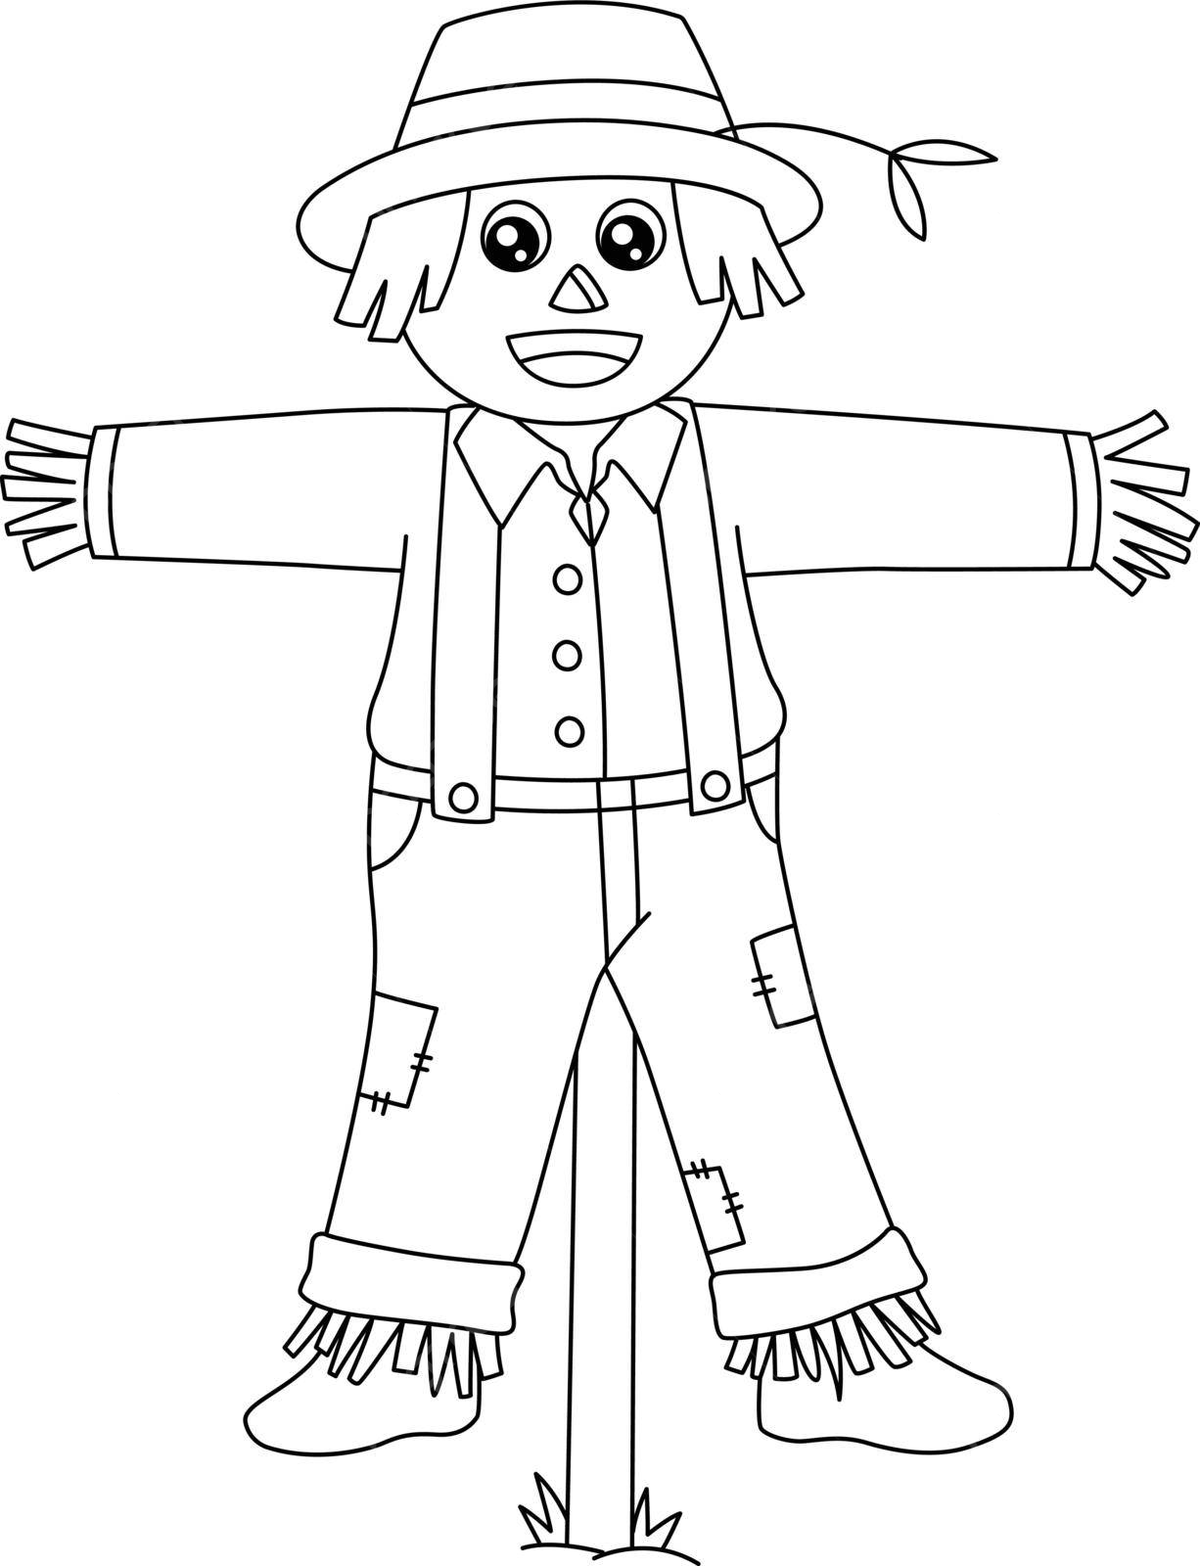 Scarecrow coloring page isolated for kids colouring book color isolated vector car drawing book drawing ring drawing png and vector with transparent background for free download